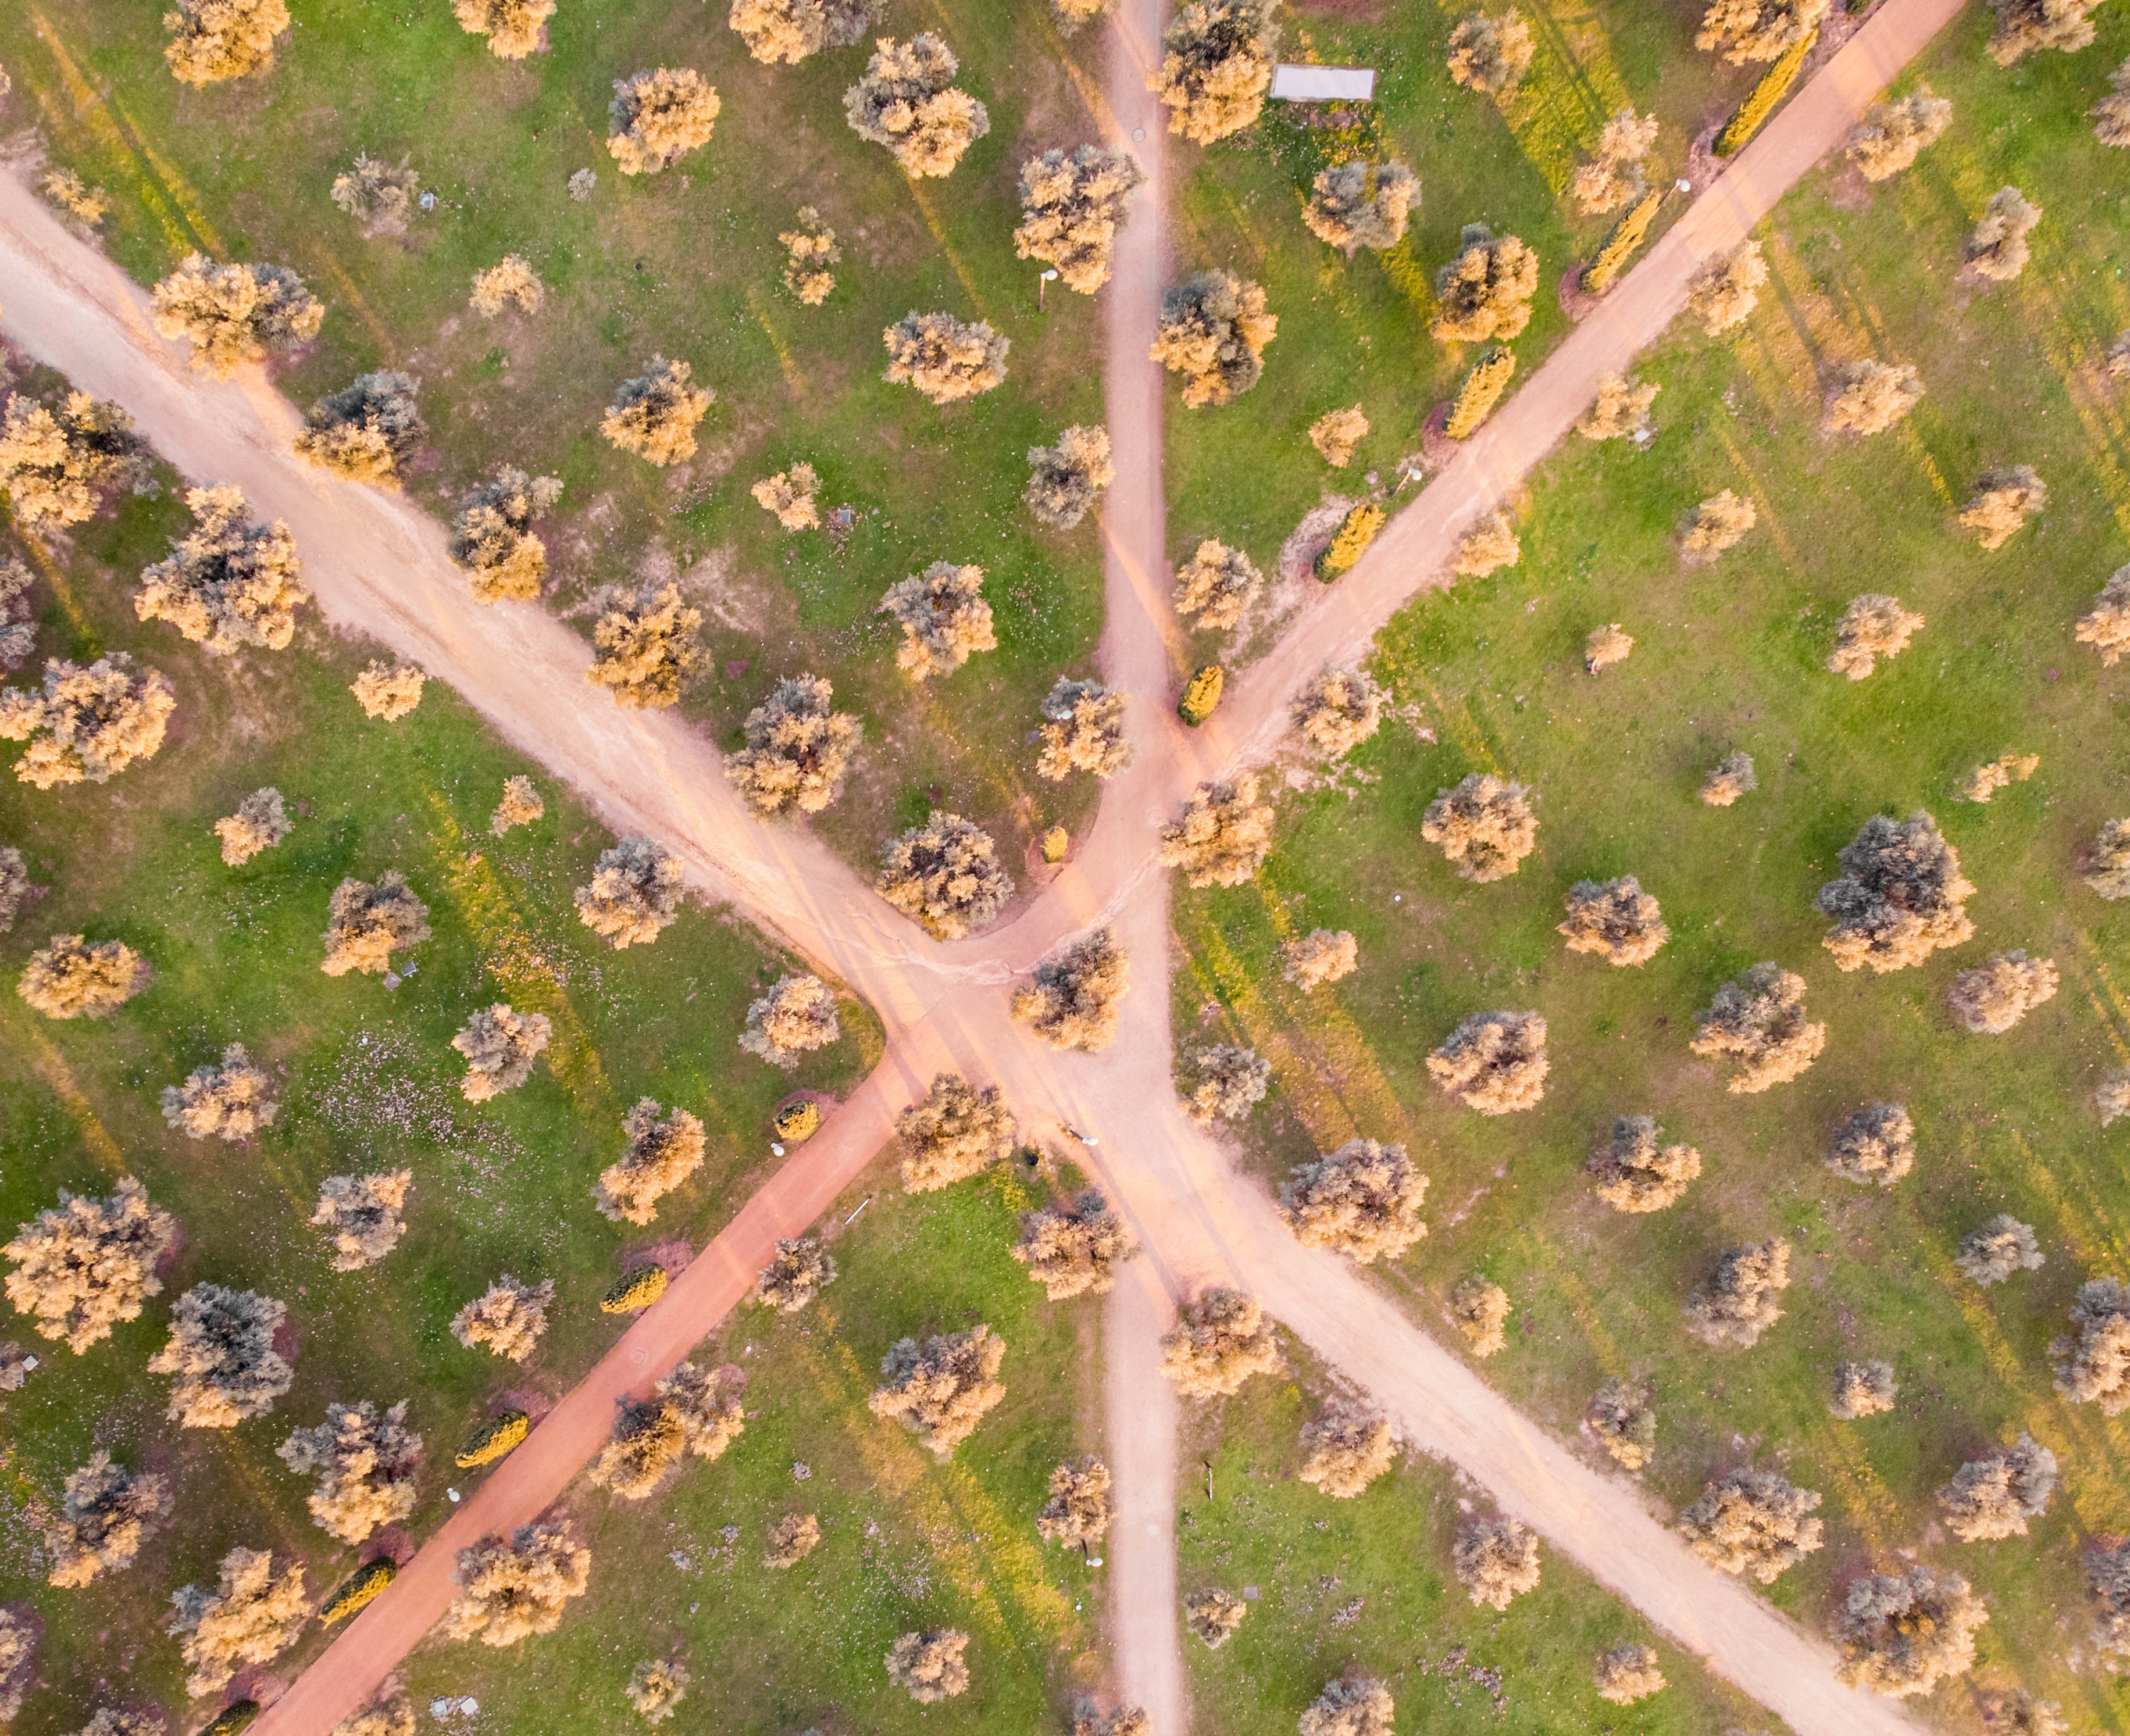 Top down view from the sky of dirt roads intersecting